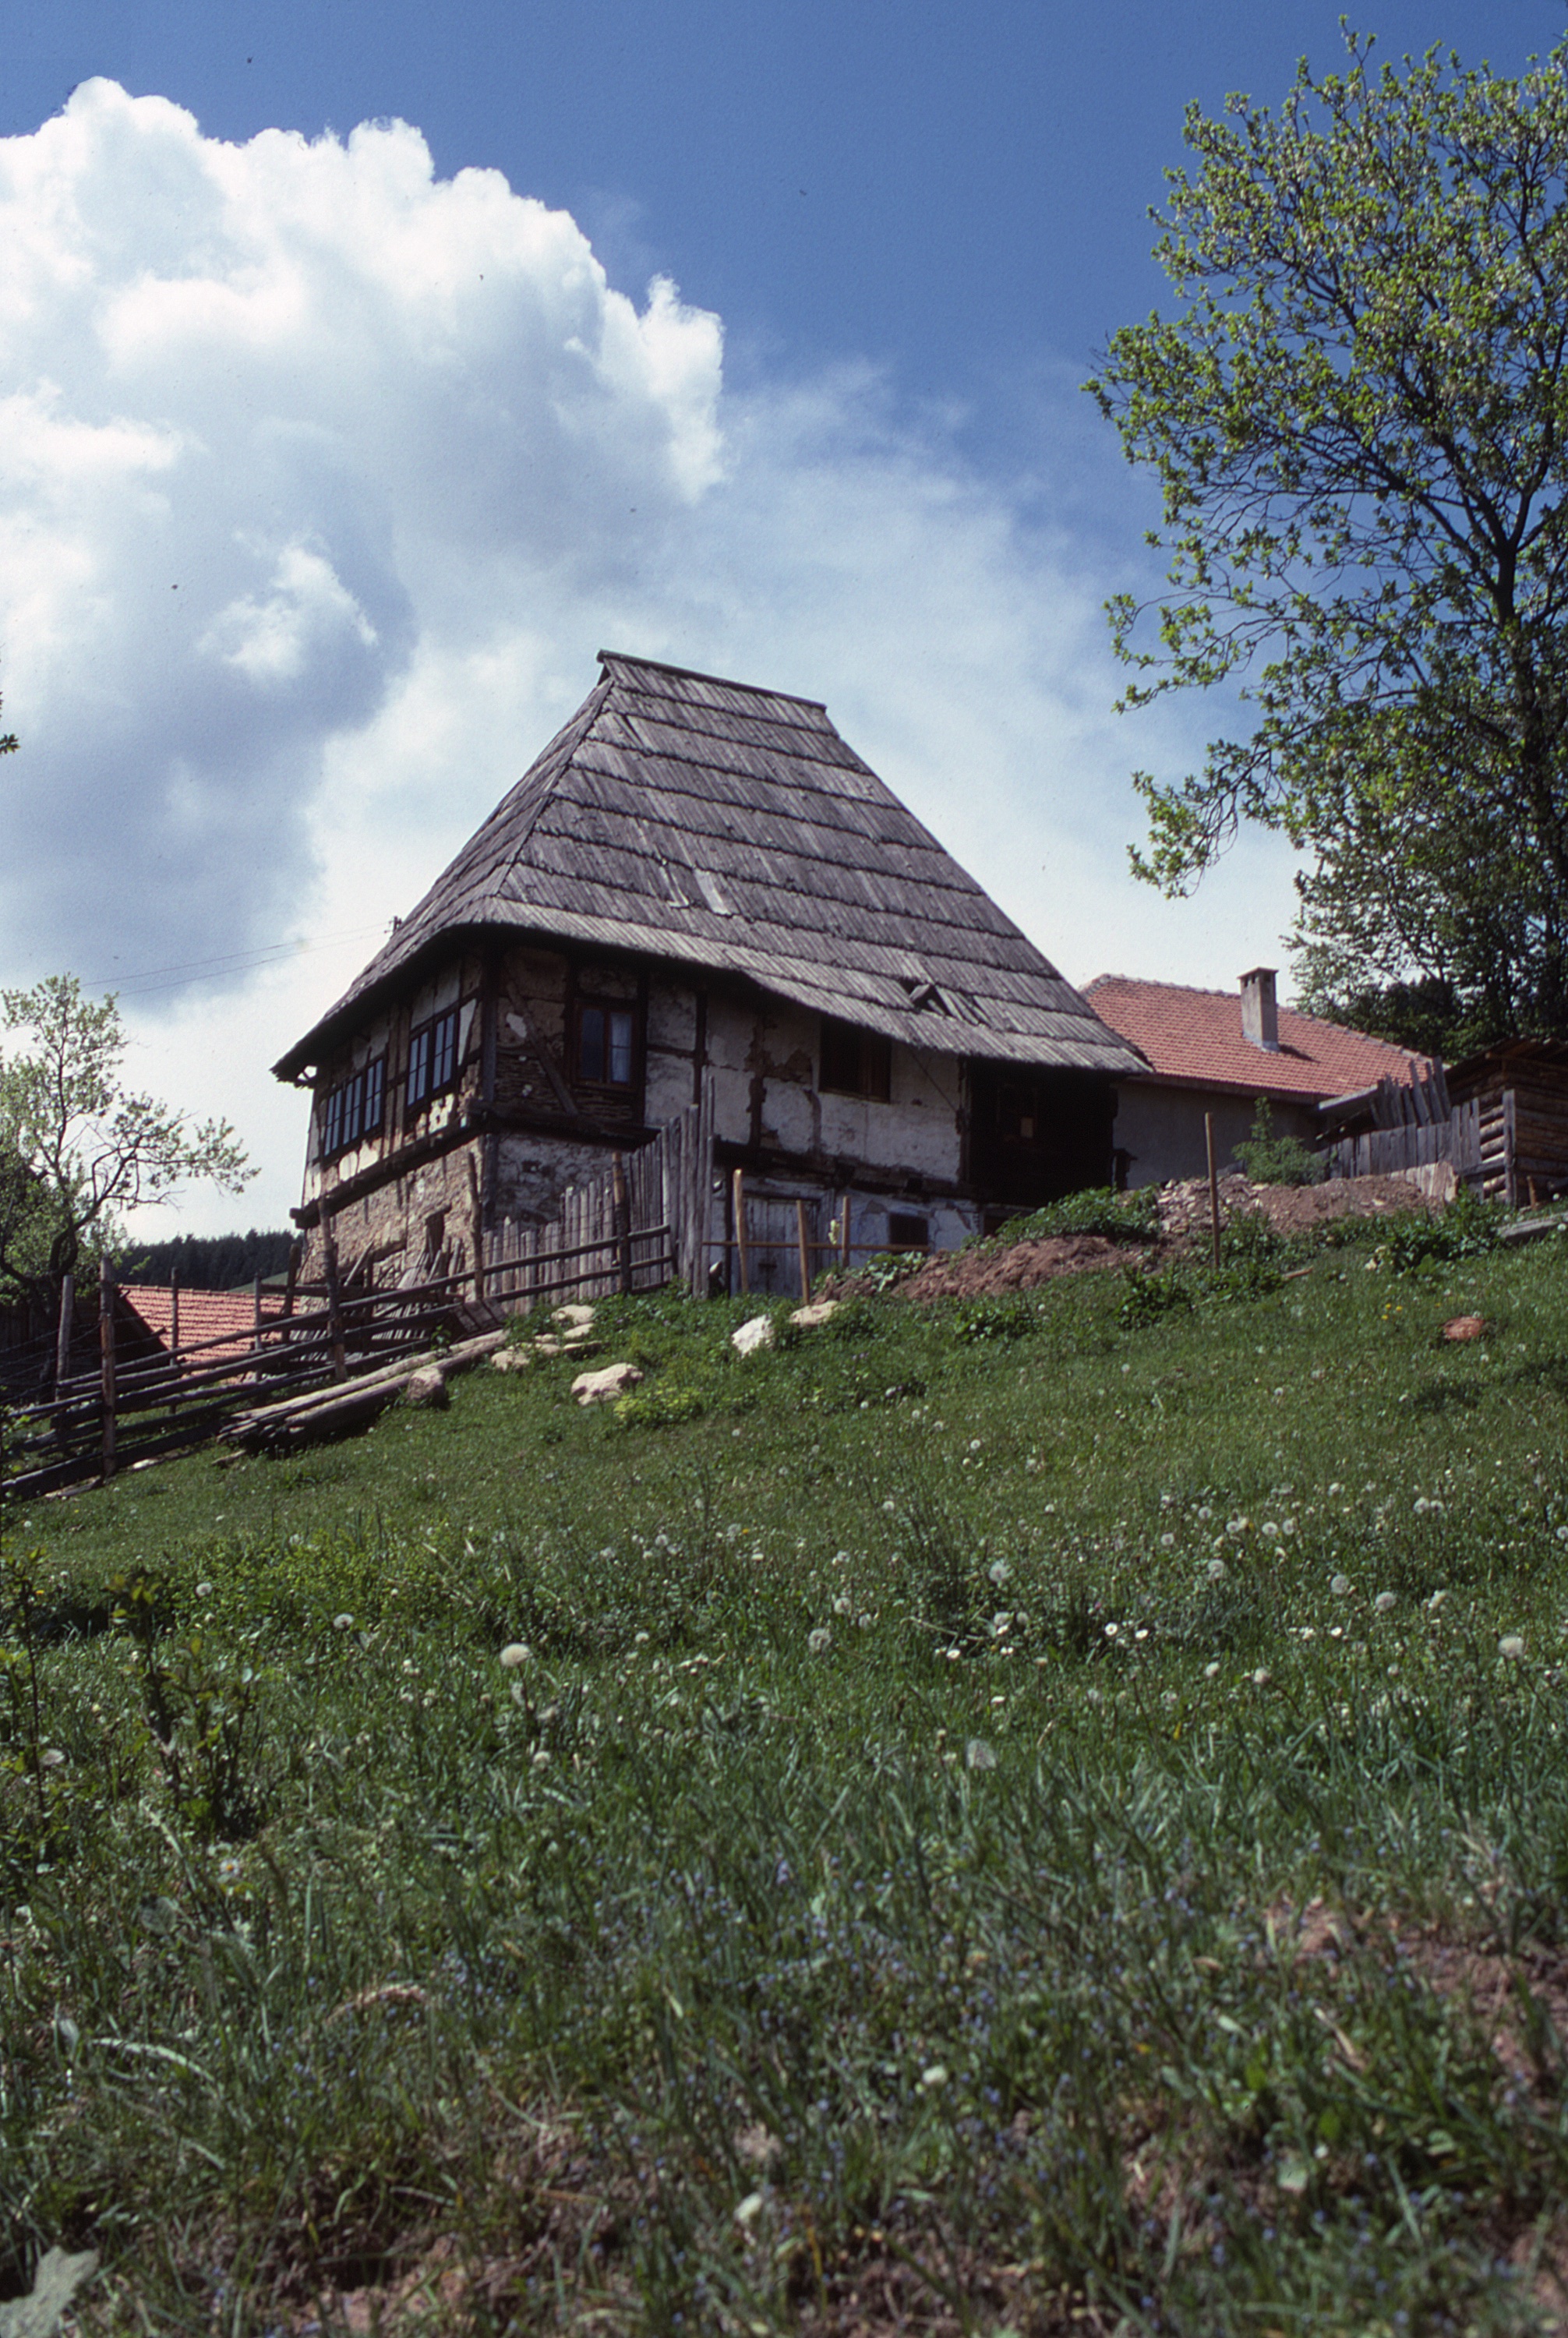 <p>Rožaje is an old town in northeastern Montenegro, with medieval origins, and this is a typical house in this mountainous region. In this variation of the Dinaric mountain house, the living spaces are elevated, formed of timber frame construction with a wattle and daub infill above a masonry base. The steep roof is typical of Dinaric houses and the exposed diagonal bracing on the upper level, left exposed or covered with a plaster material, a wall treatment commonly found in this region.</p>